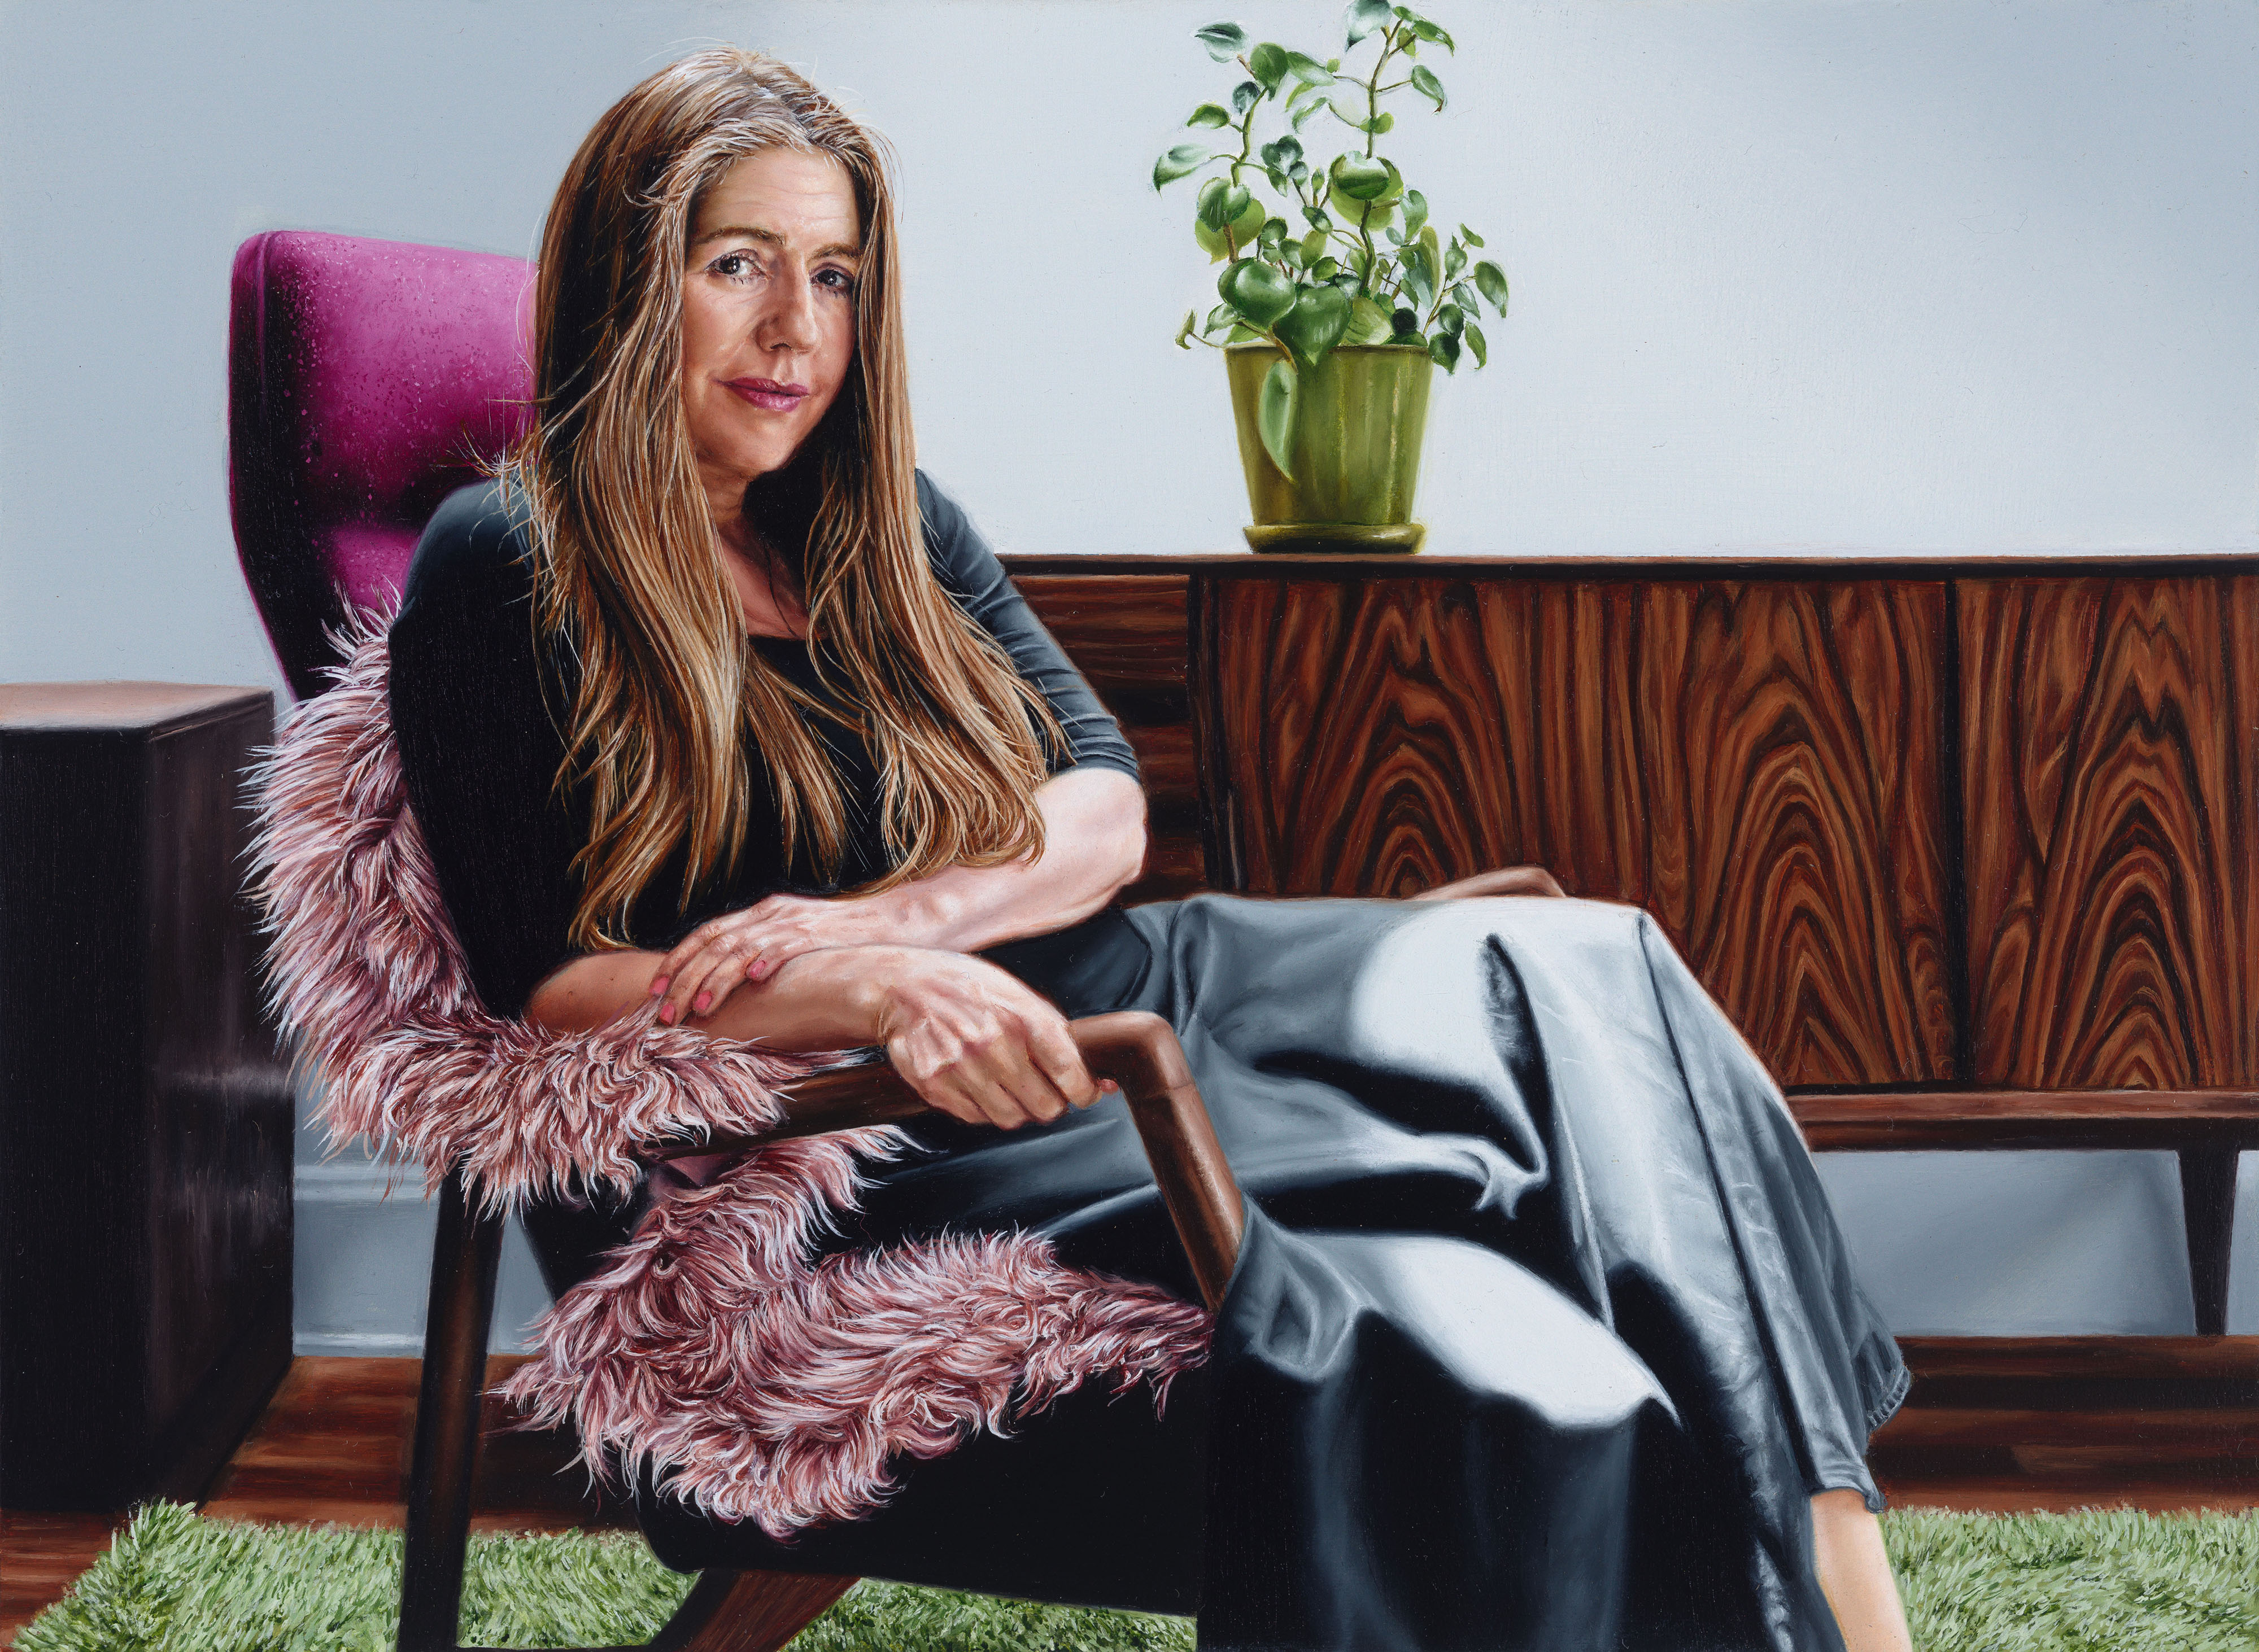 Portrait of Australian artist Patricia Piccinini sitting in a chair, with pot plant and credenza behind her